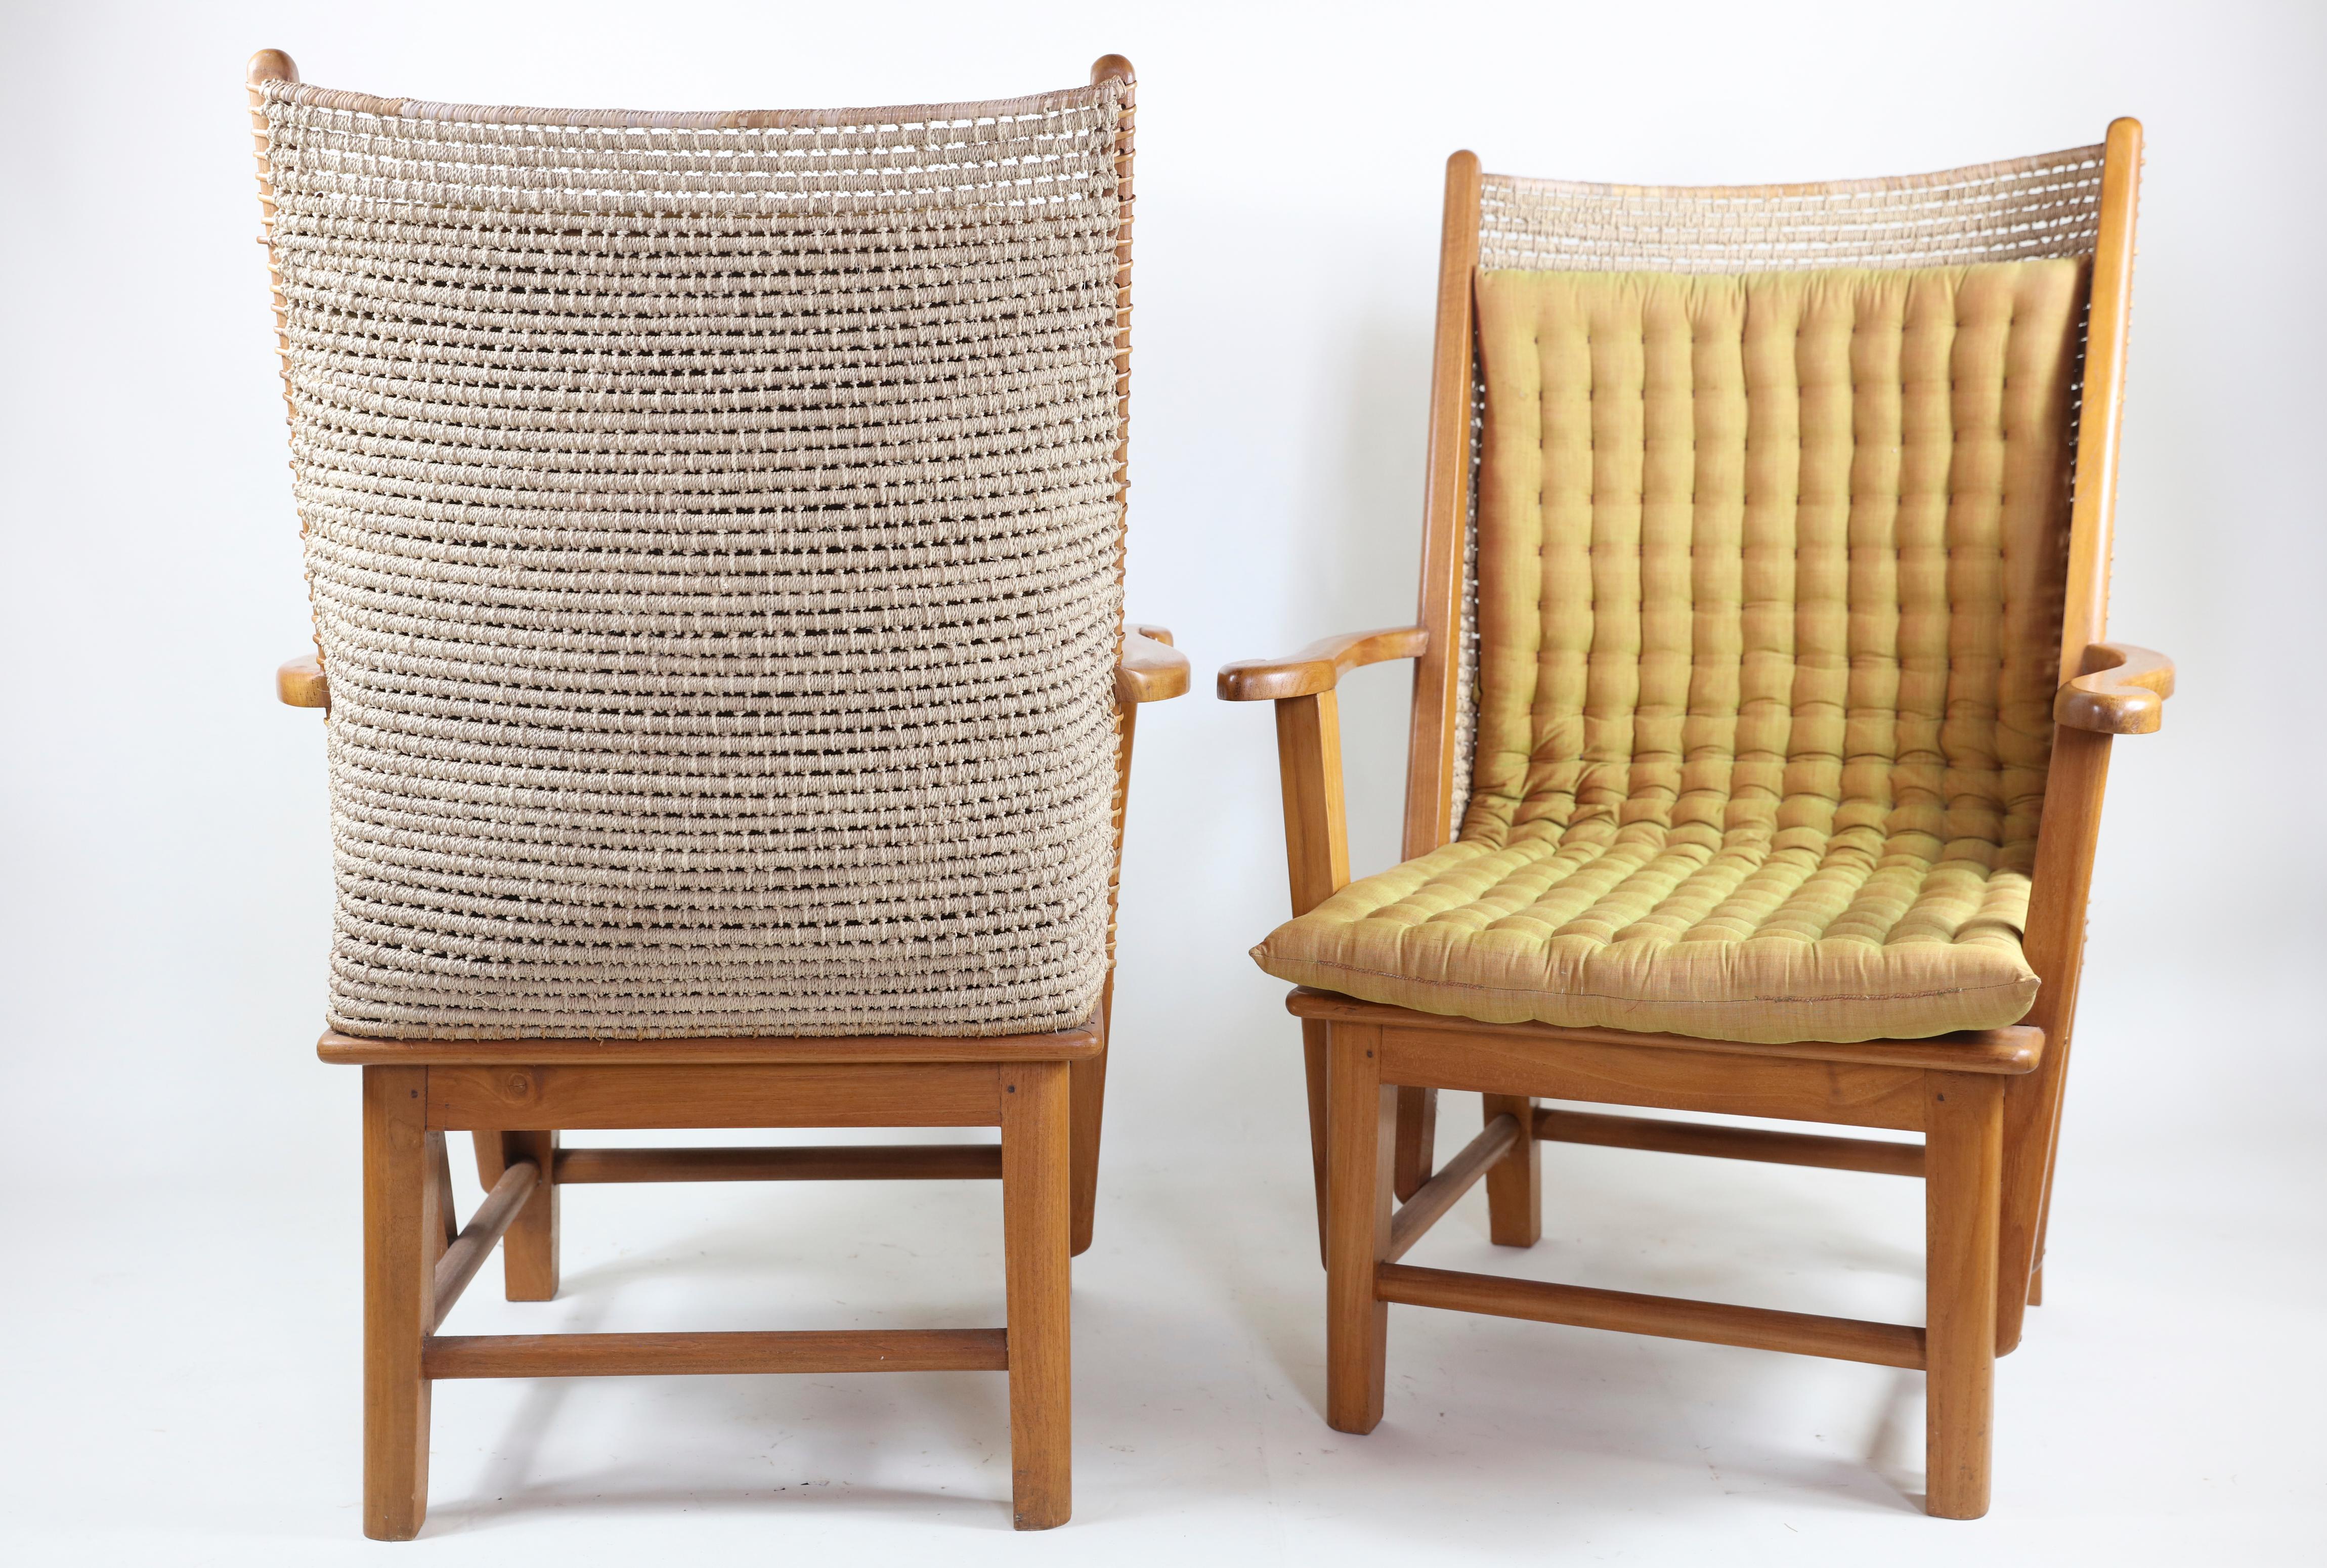 Women's or Men's Pair of Woven Jute High Back Chairs with Cushions